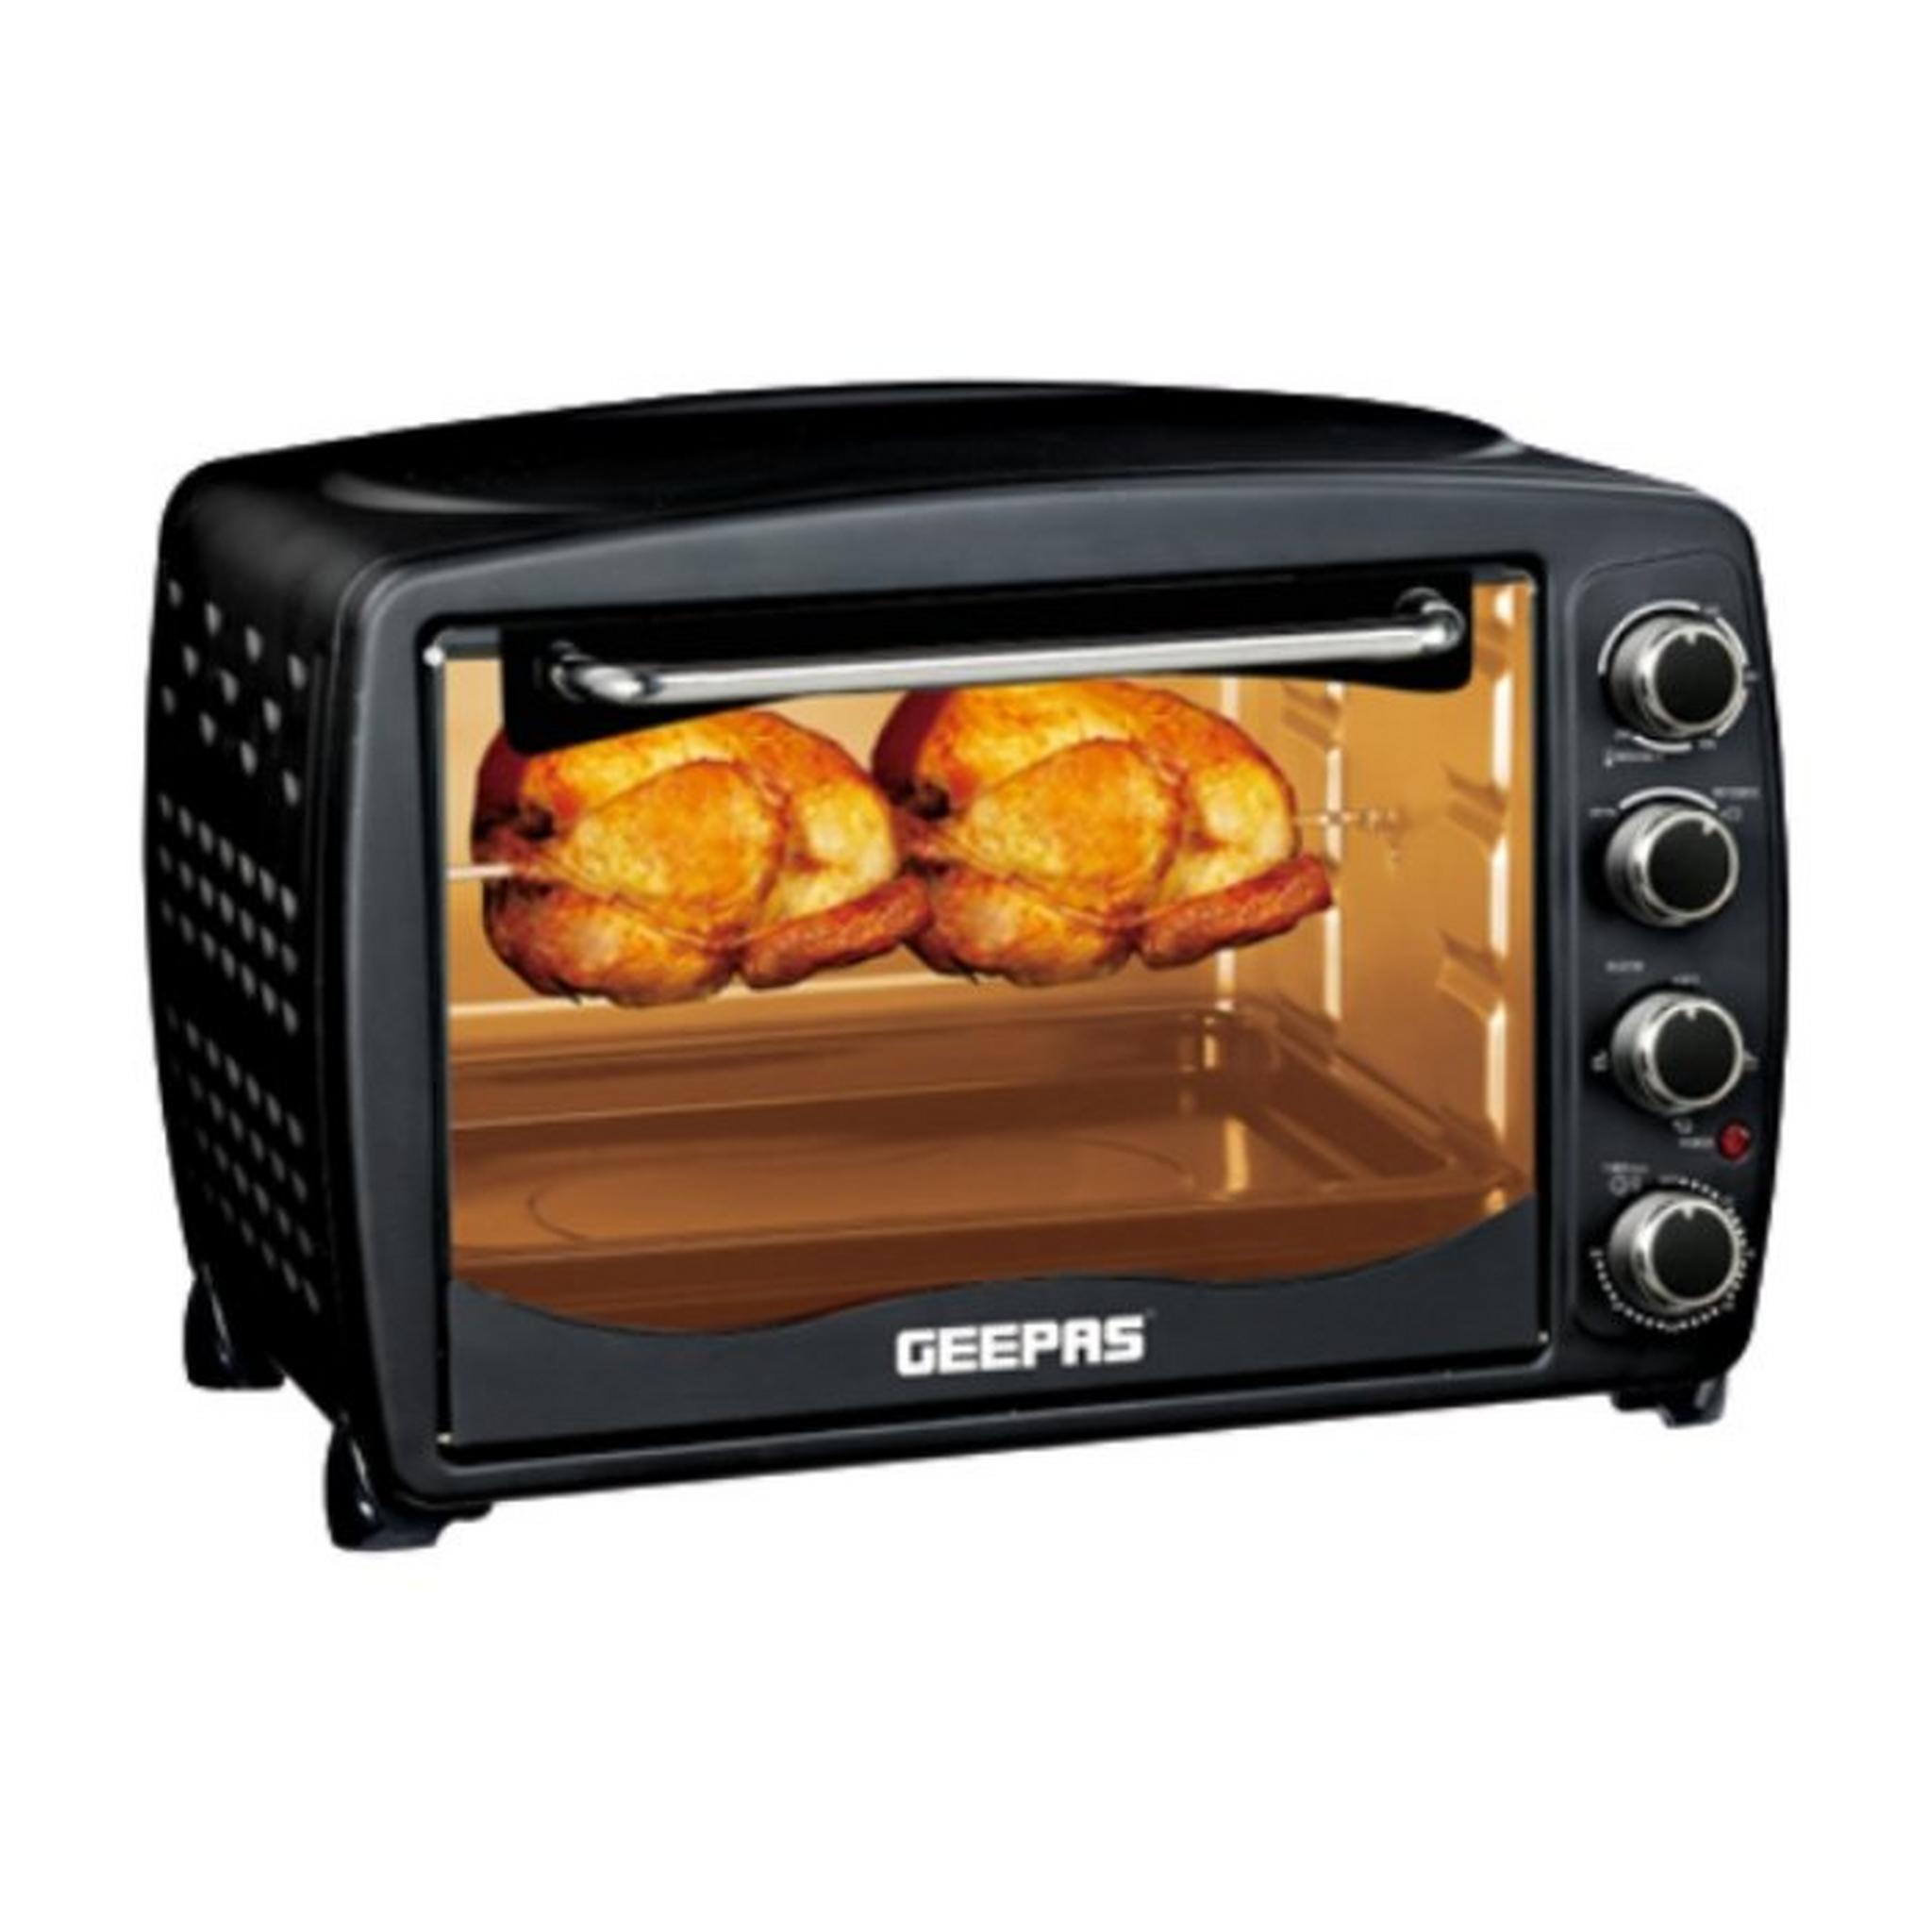 Geepas 1500W 42L Electric Oven - Black (GO4450)